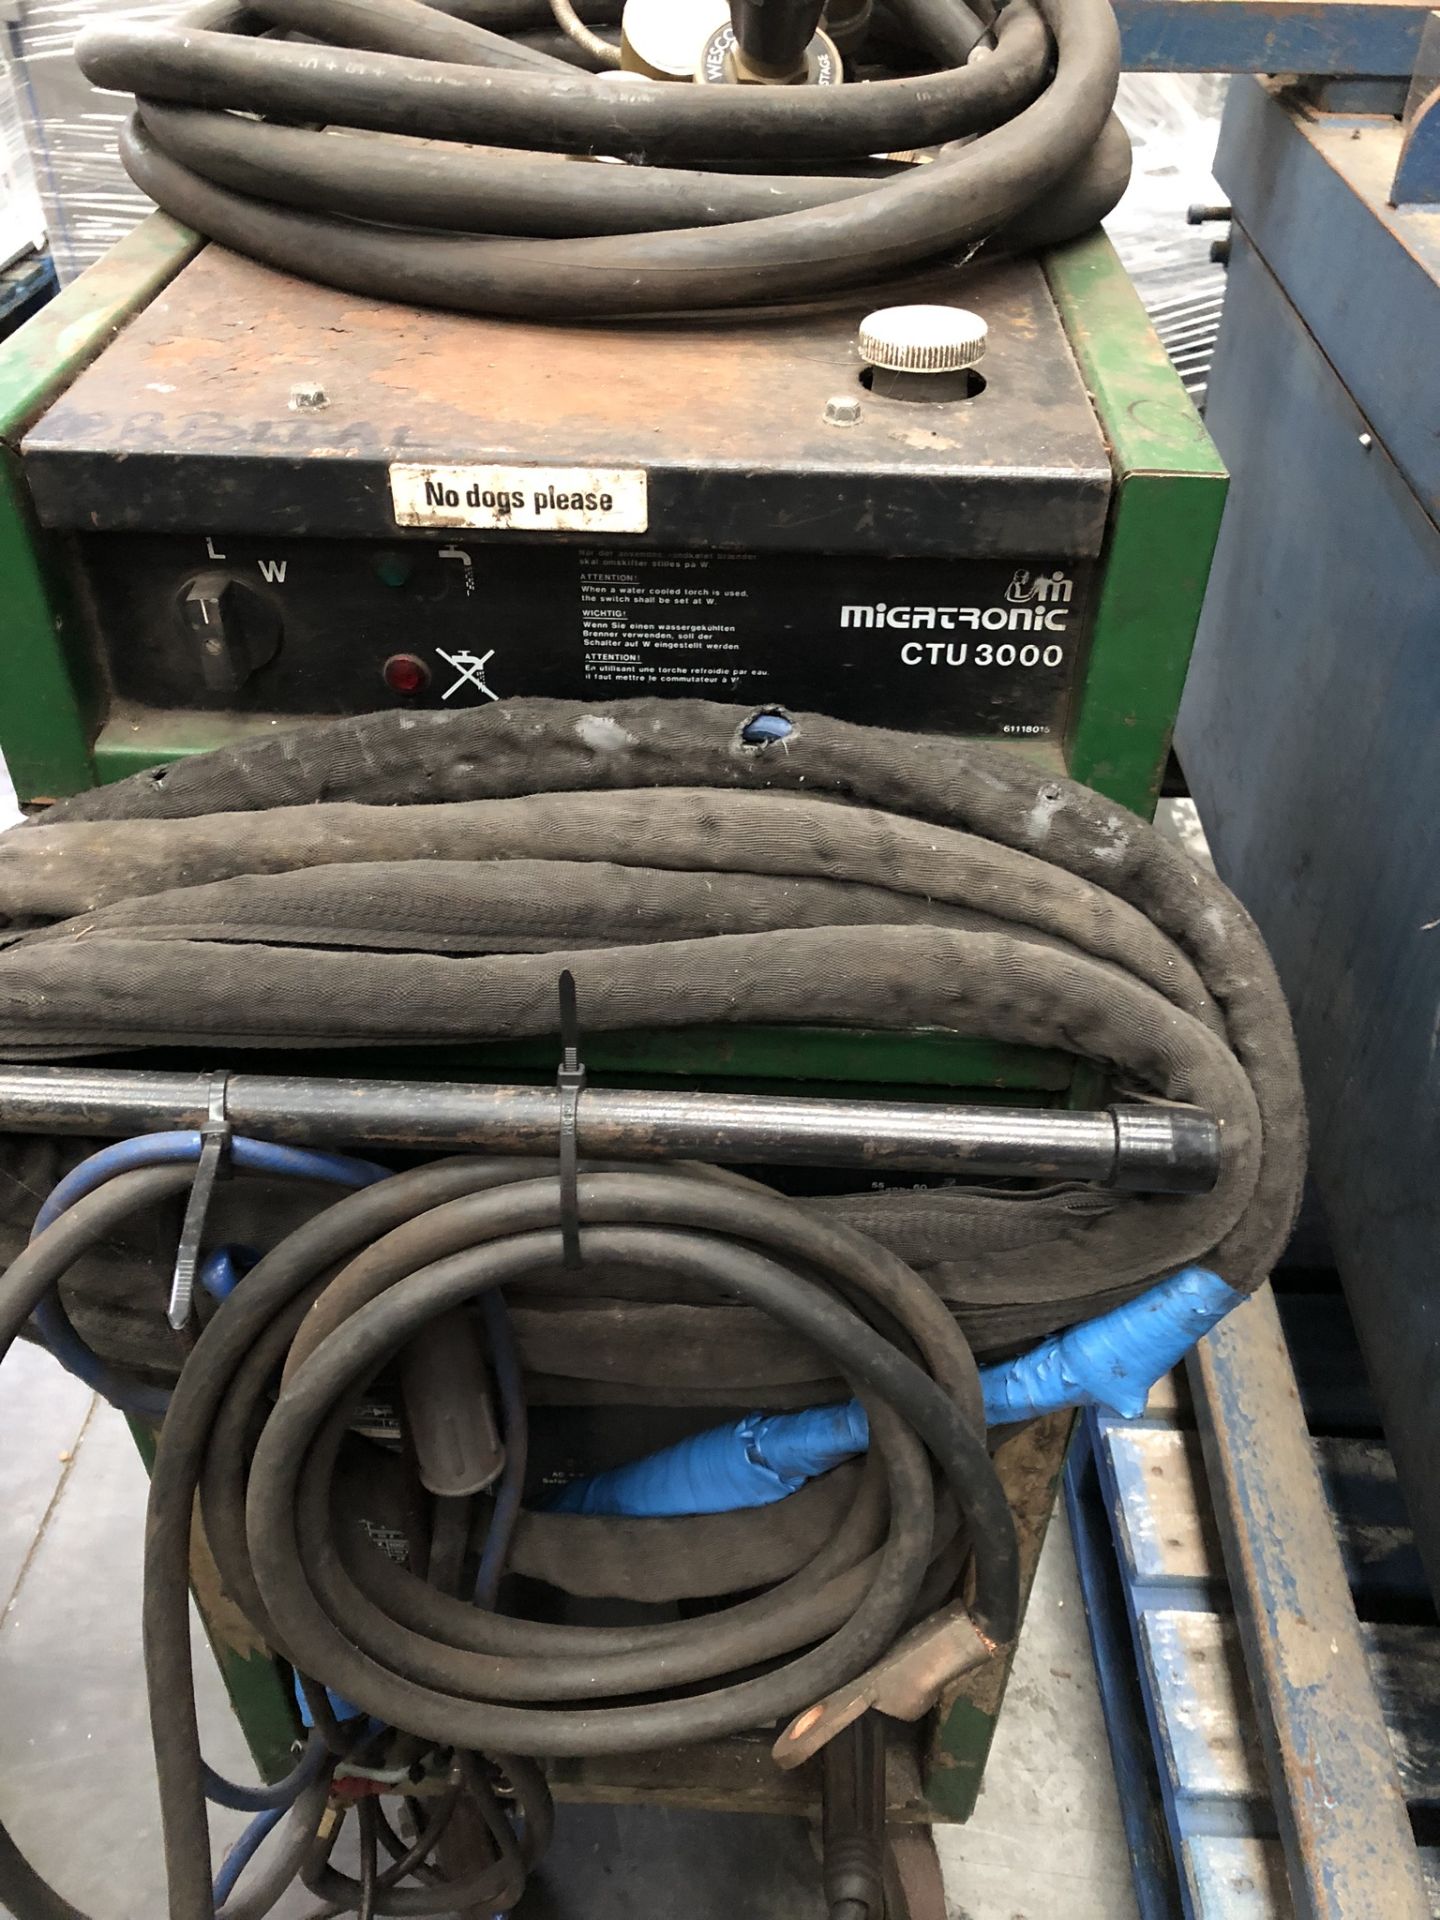 Migatronic CTU 3000 Welder, lift out charge - £40 - Image 2 of 2